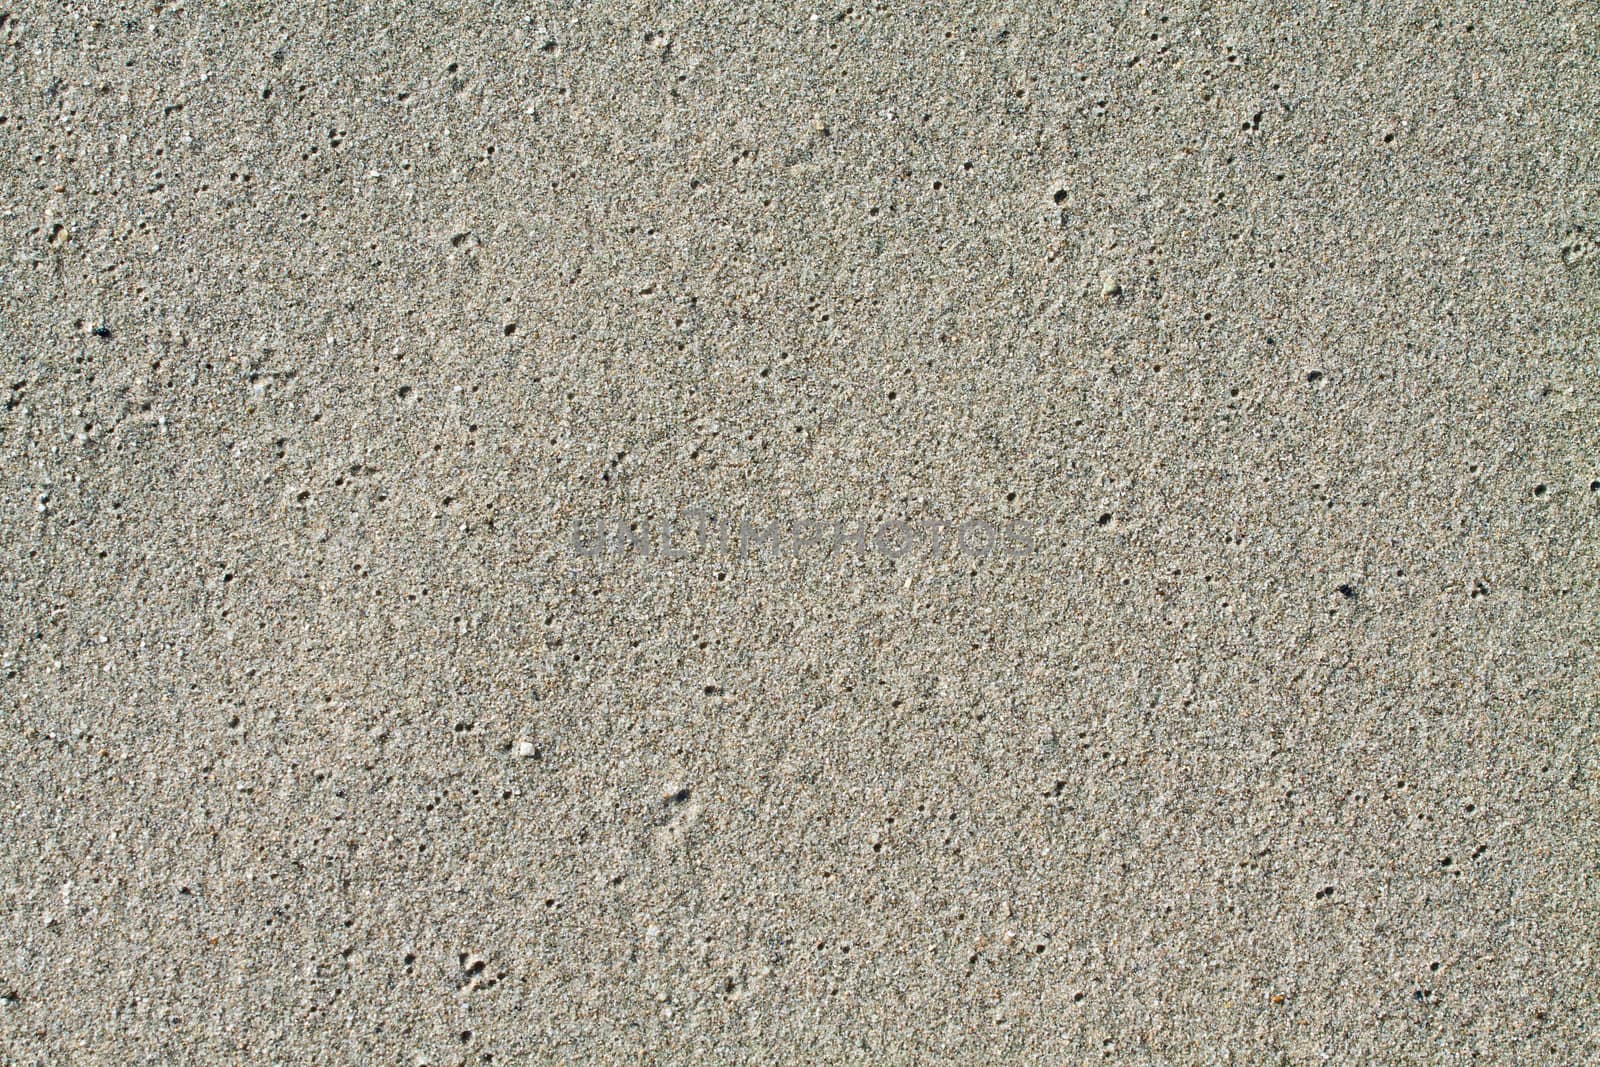 Close up of wet sand ideal for backgrounds and compositions.